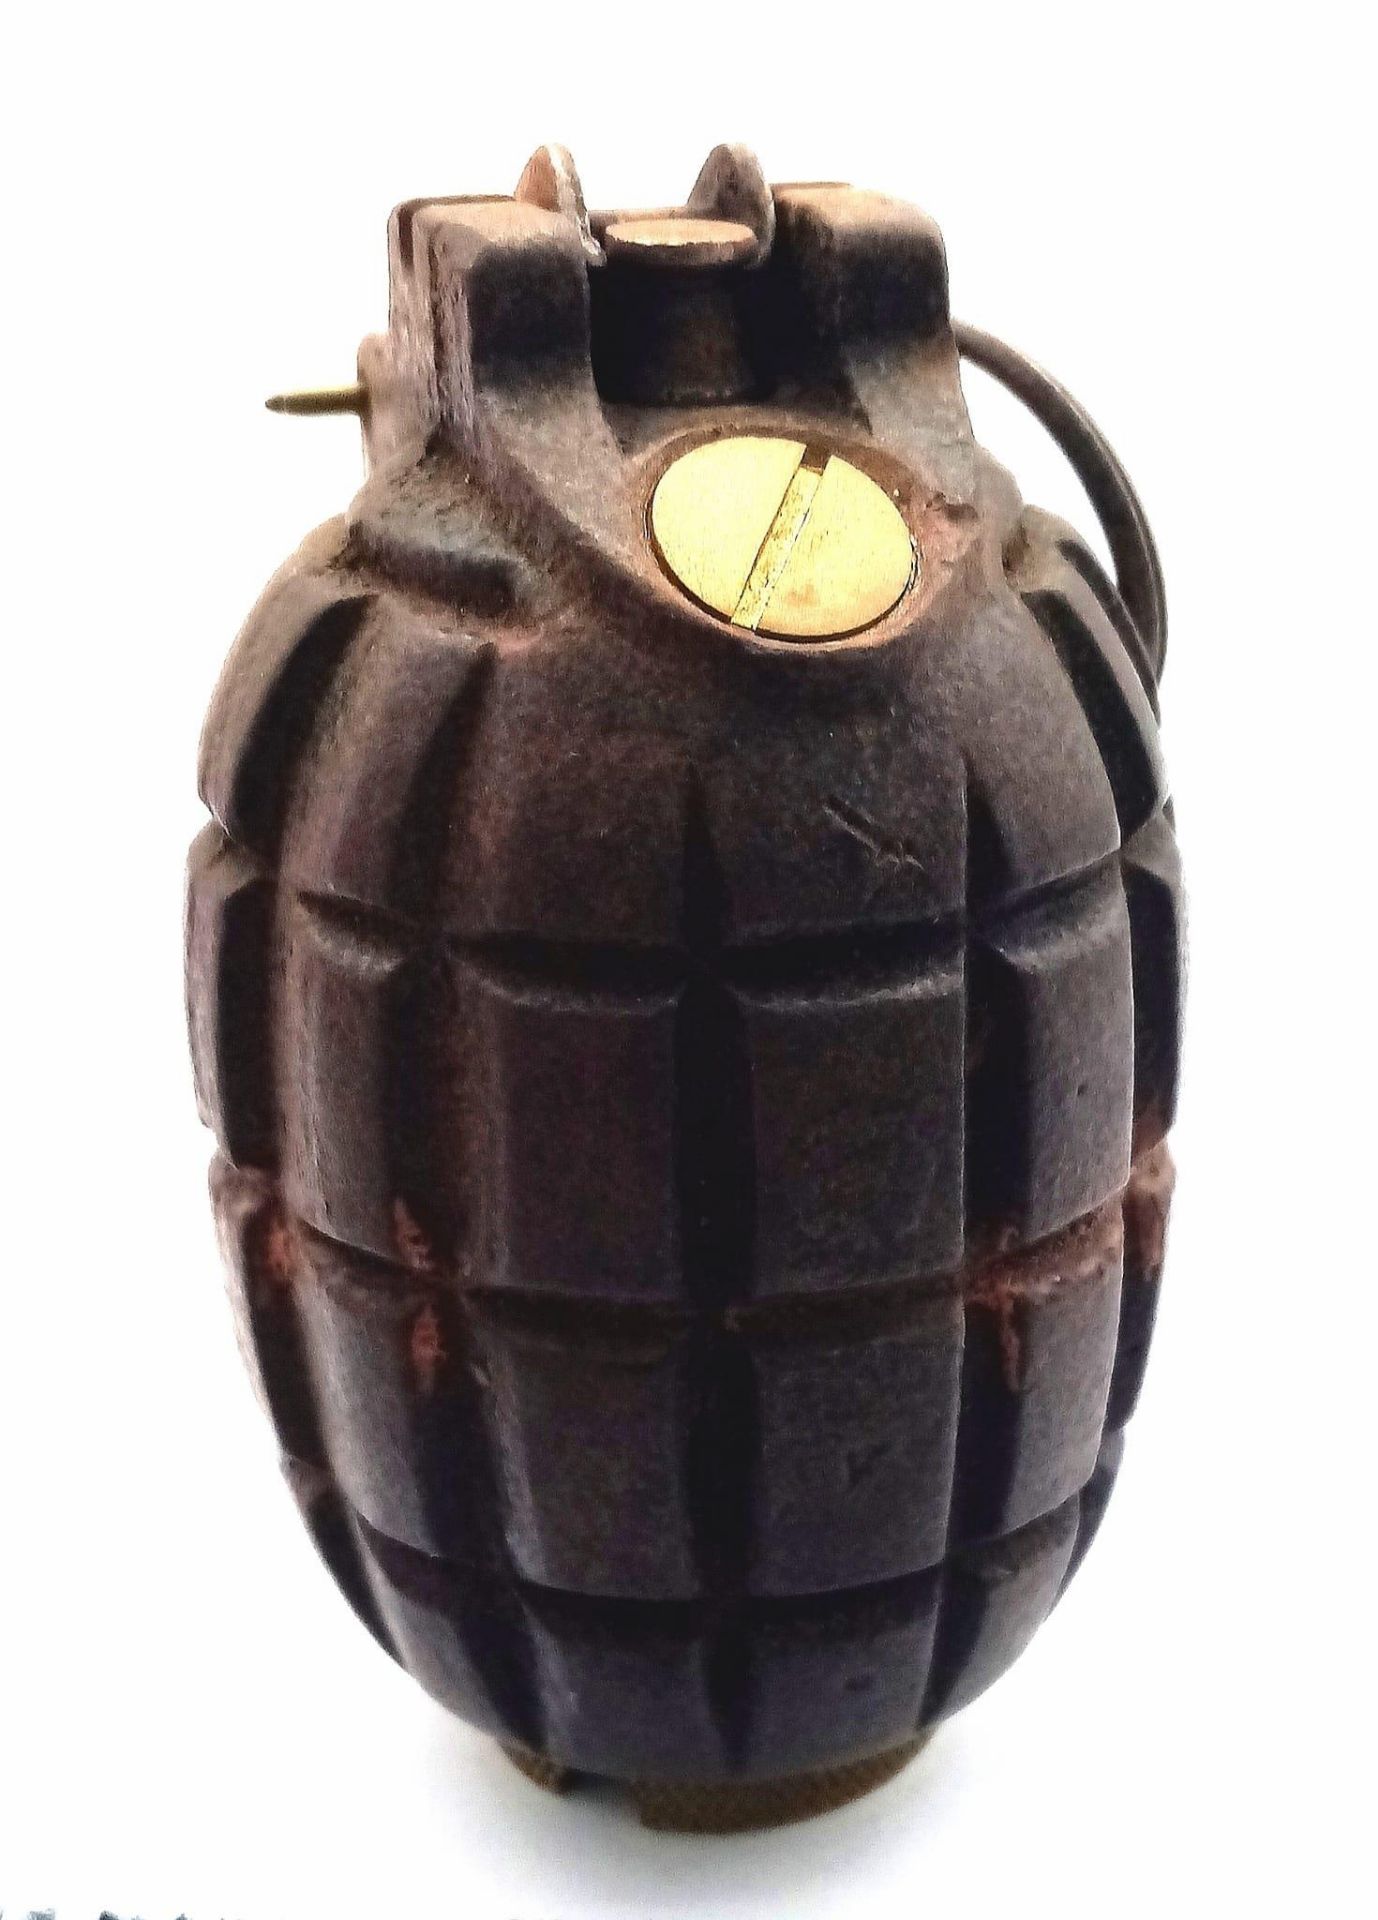 INERT WW1 No 5 Mills Hand Grenade Dated Feb 1916. Great condition for its age. Maker Vickerys